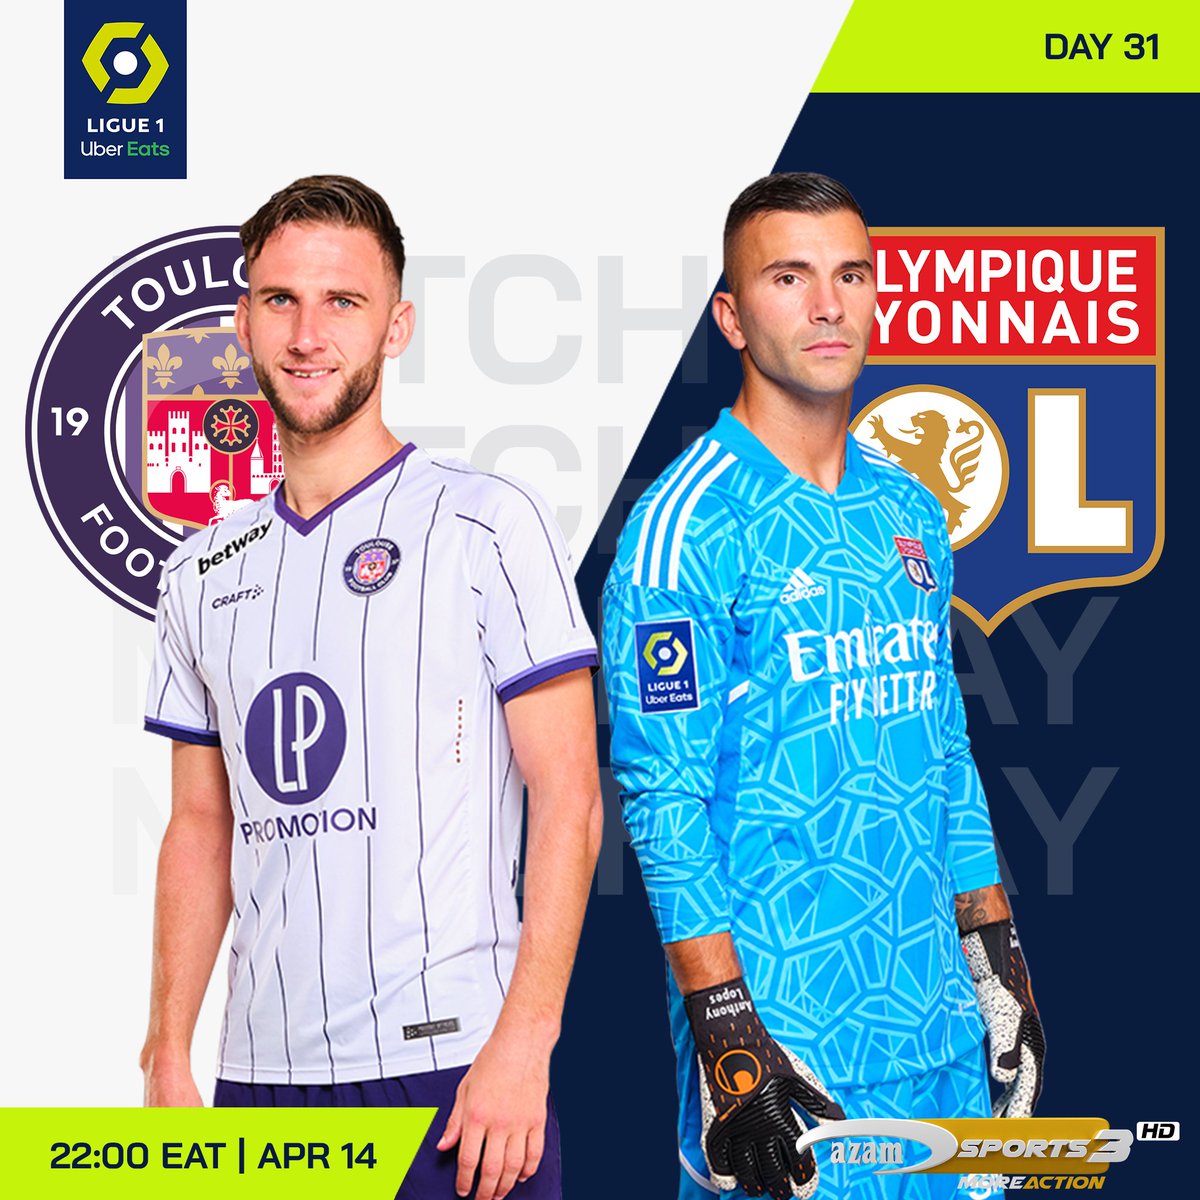 #Lyon keeps on with the struggle to play the champions' League come next season as #Toulouse strengthens its self to avoid relegation struggles..... Catch live #FrenchLigue1 on #AzamSports3HD for as low as 13,000 per month.⚽⚽⚽ @channelueast  @Azamtvug